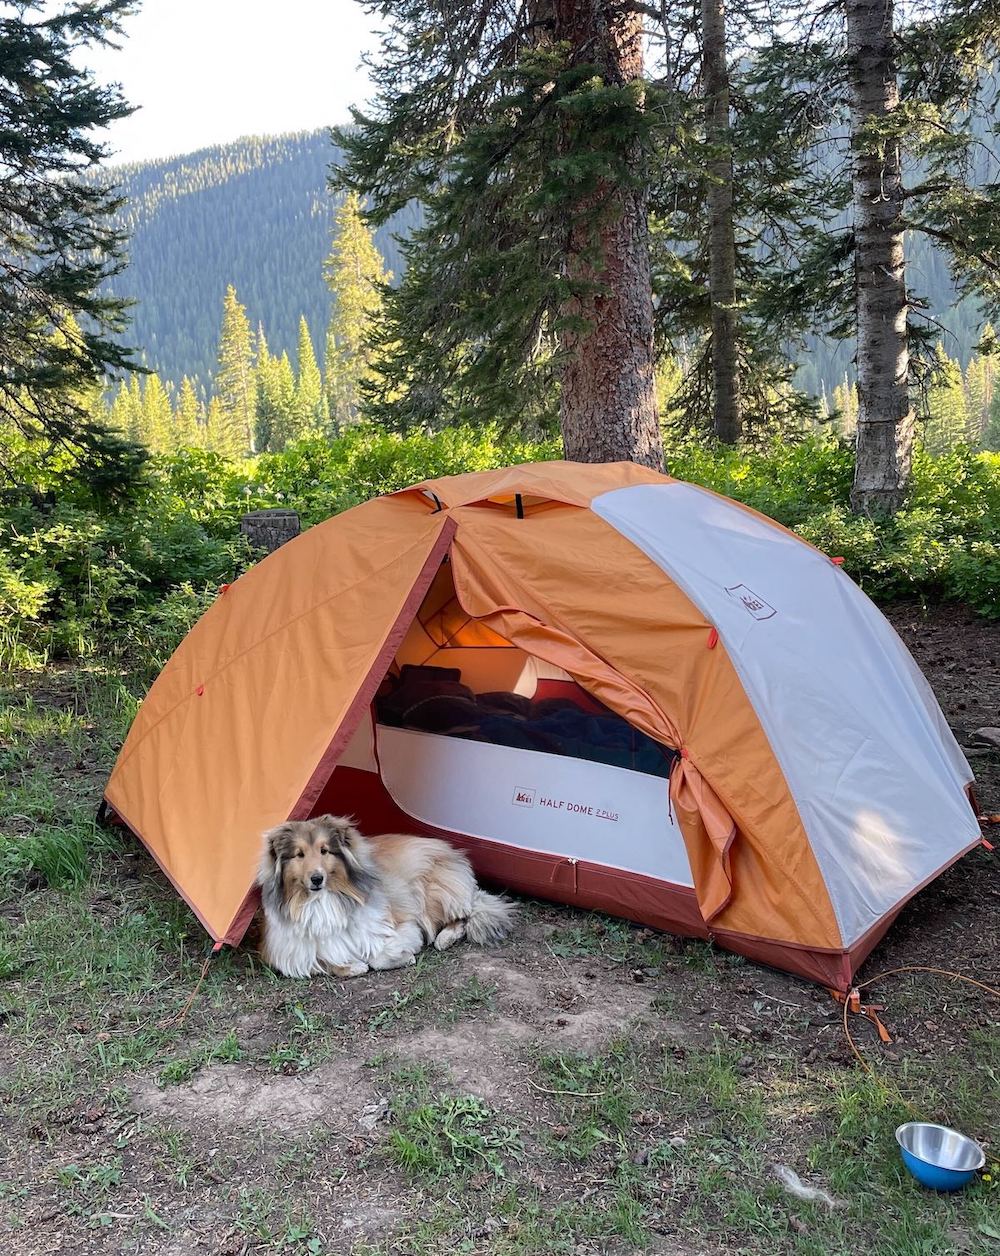 Dog camping outside the tent